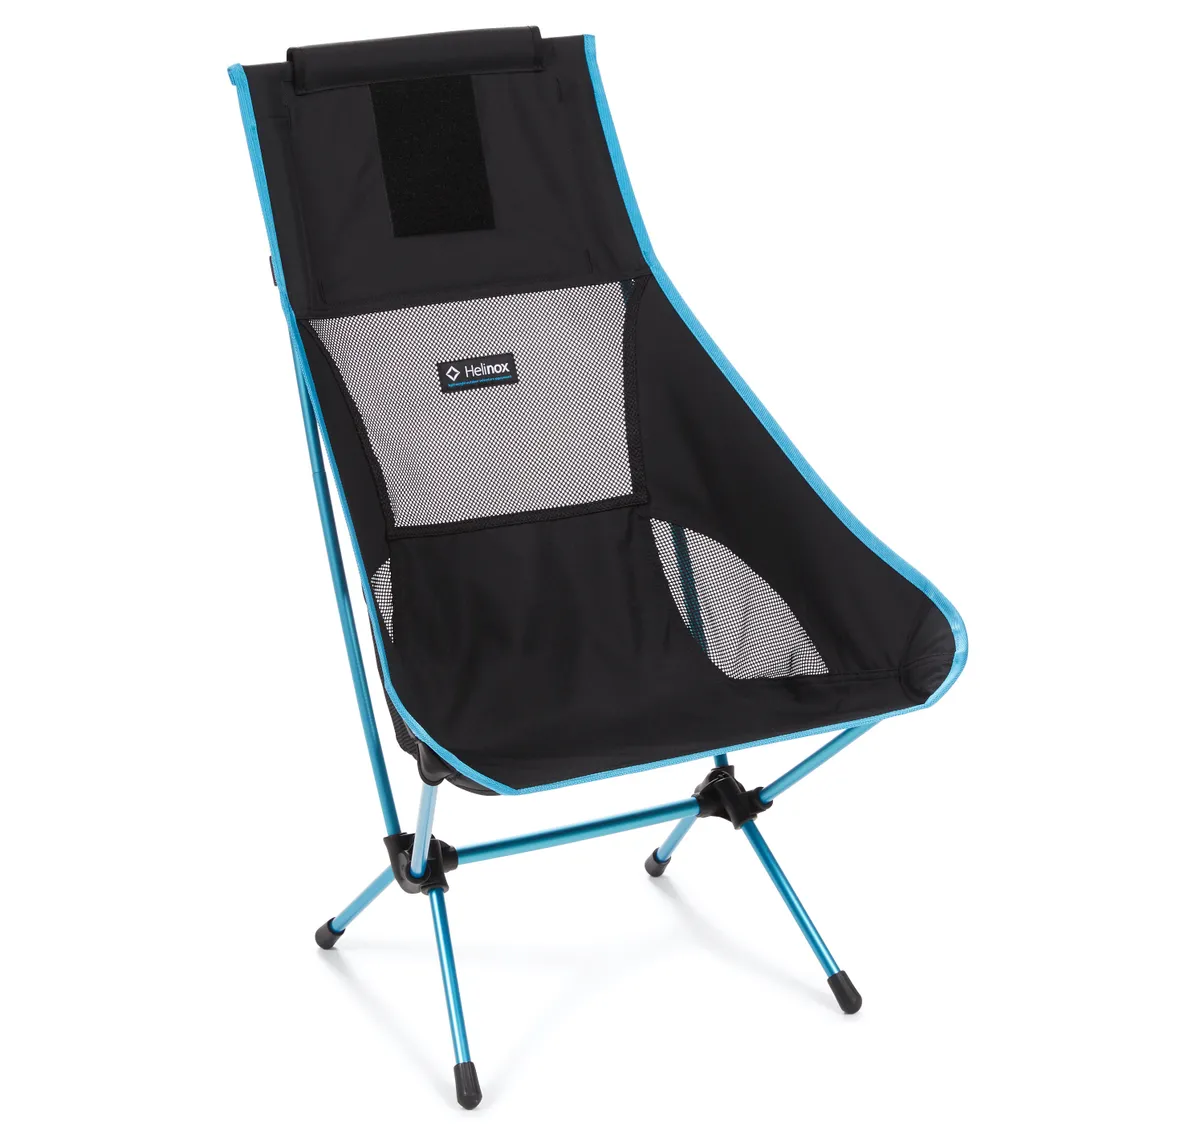 The Helinox Chair Two Camping chair